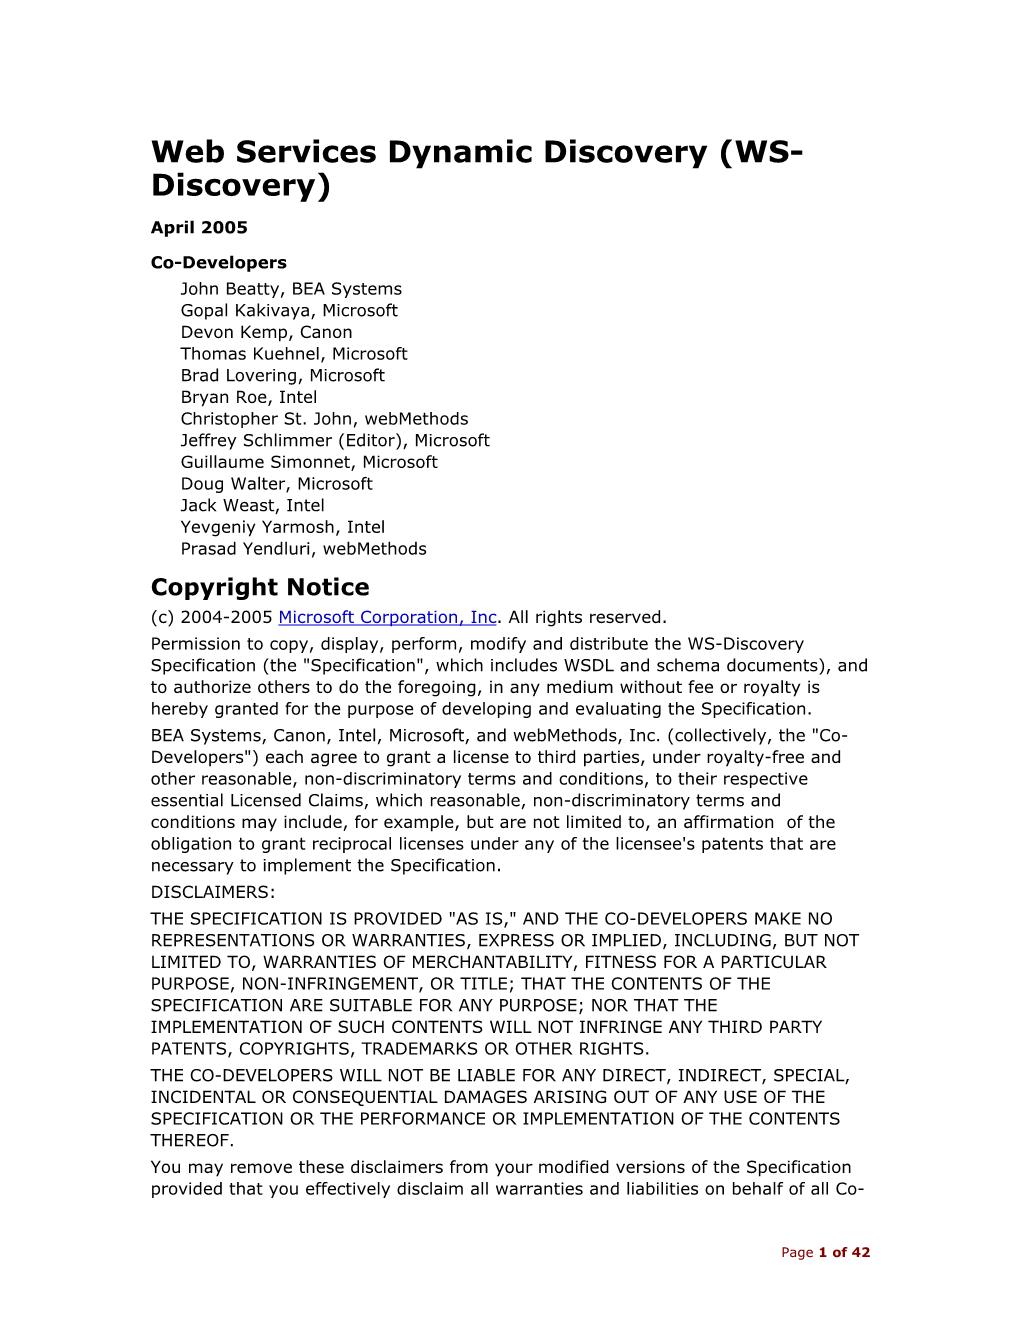 Web Services Dynamic Discovery (WS- Discovery)